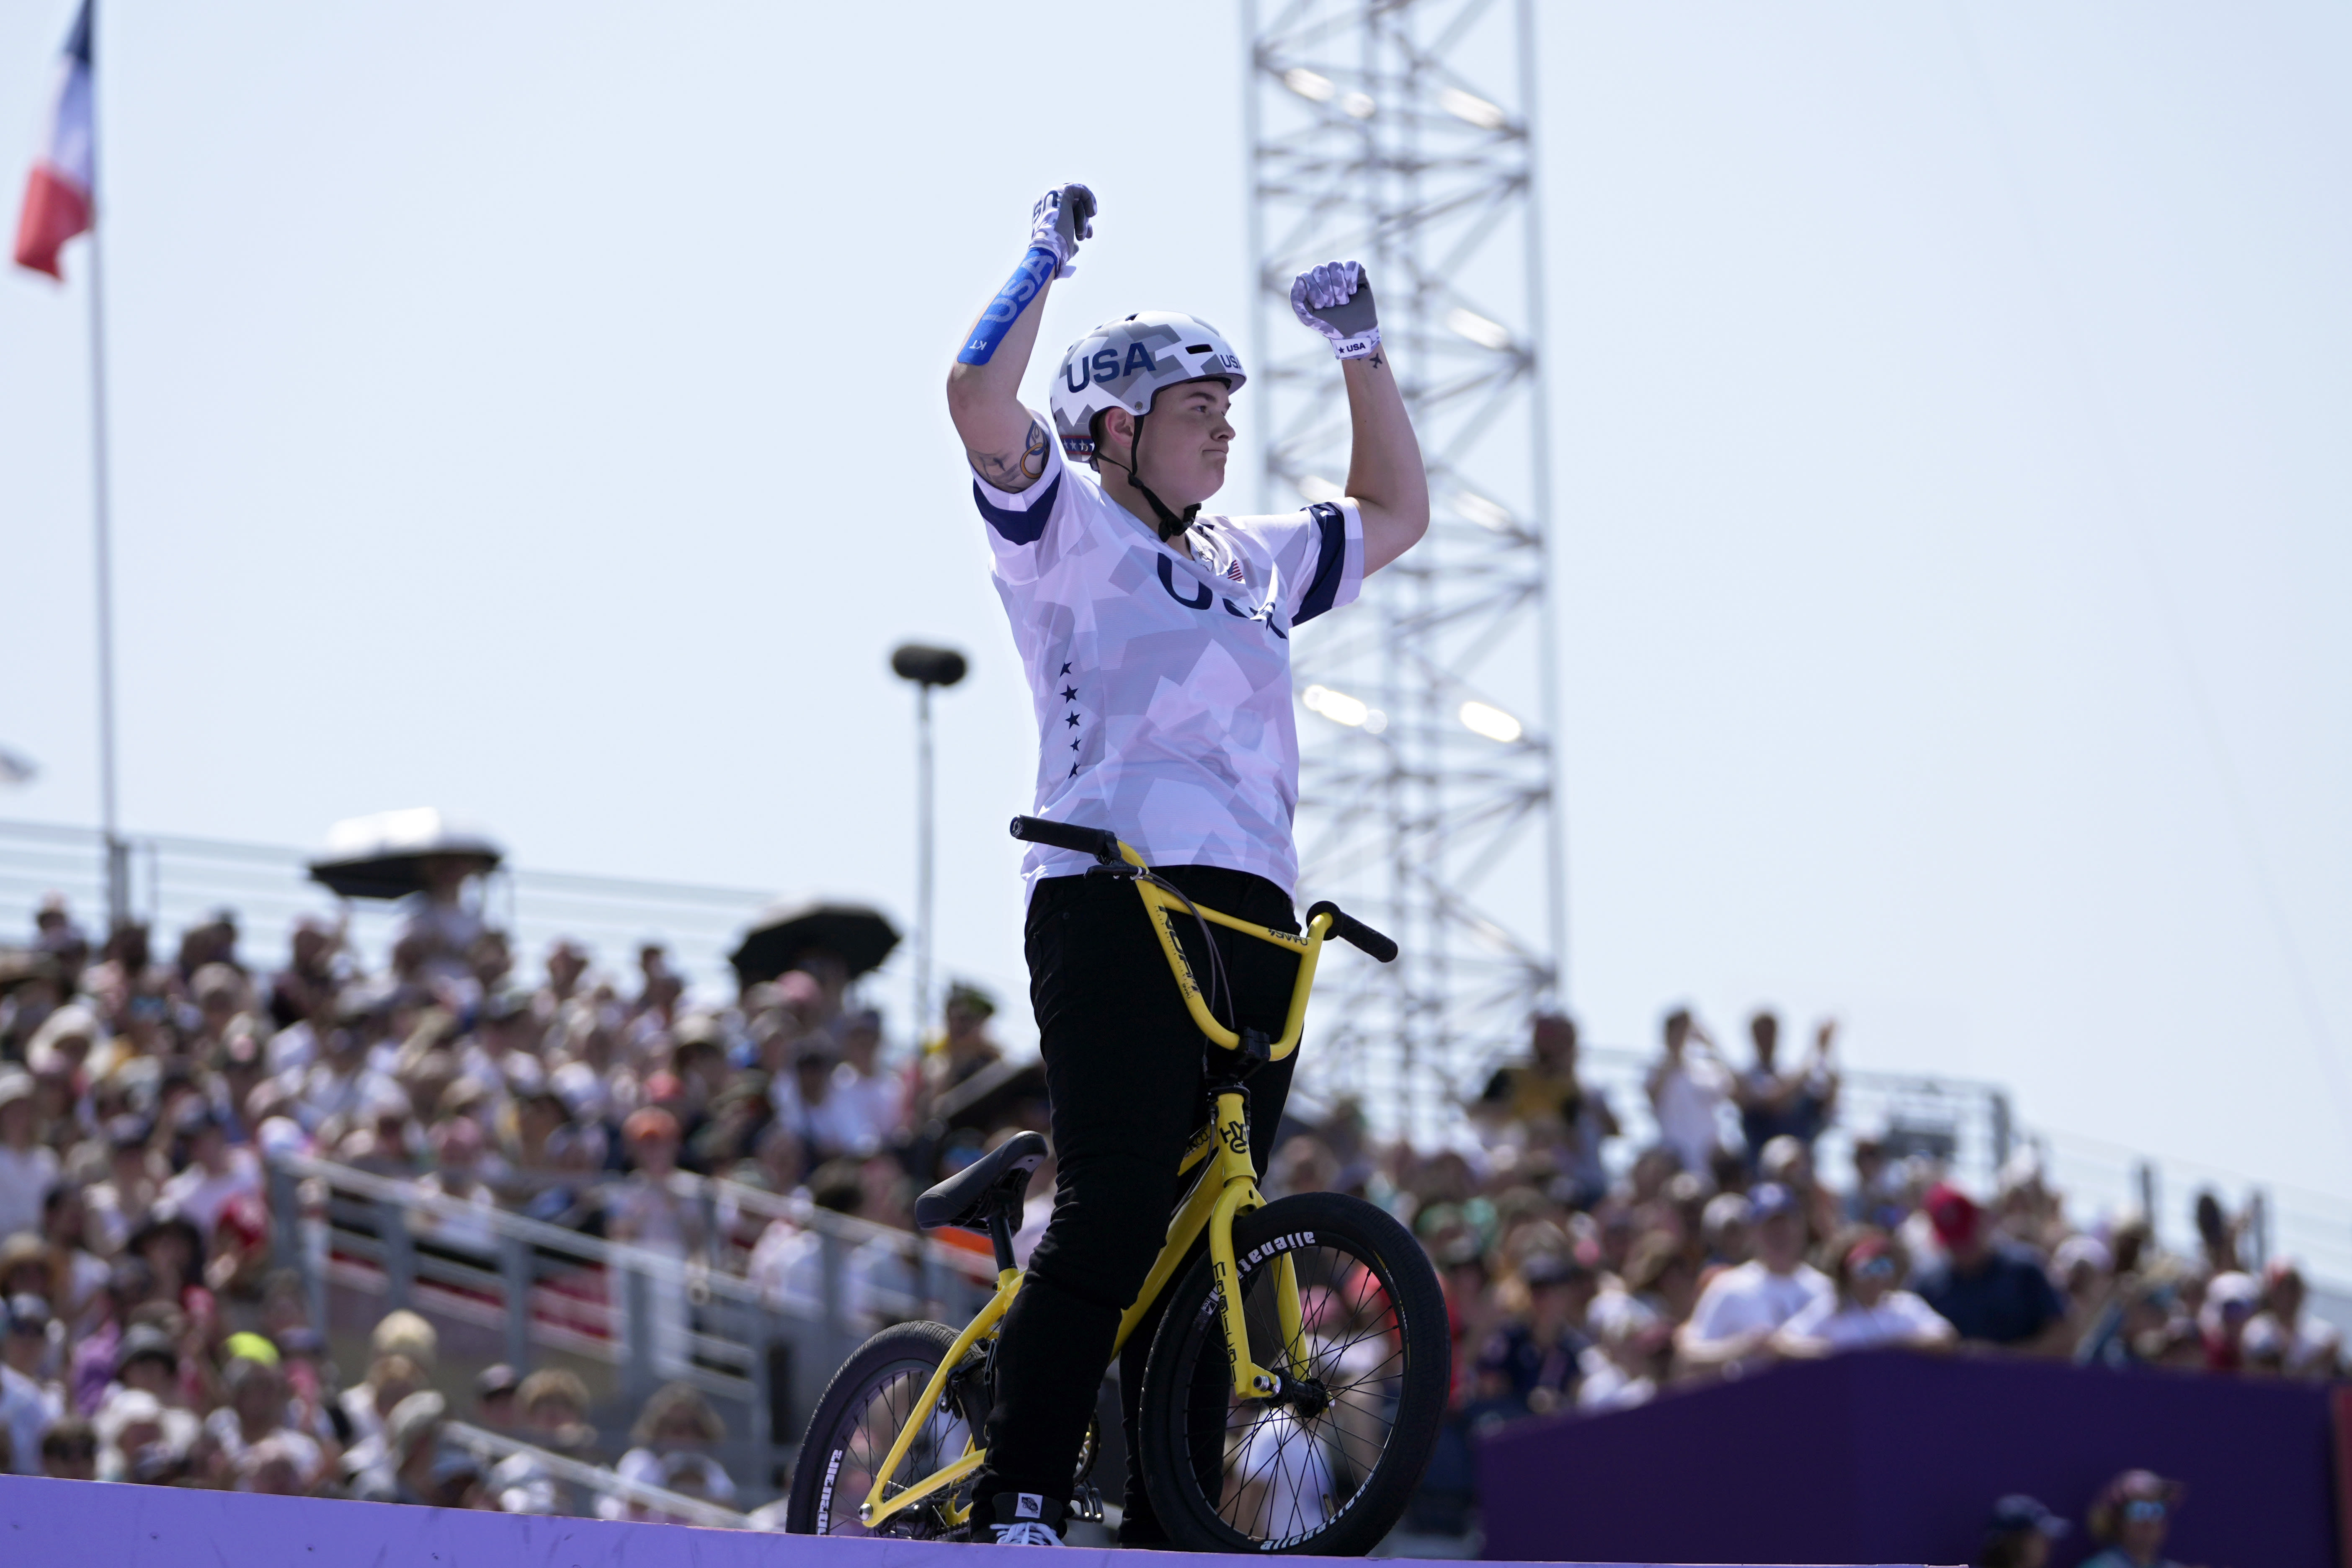 Hannah Roberts of the US tops freestyle BMX qualifying as defending Olympic champ fails to advance